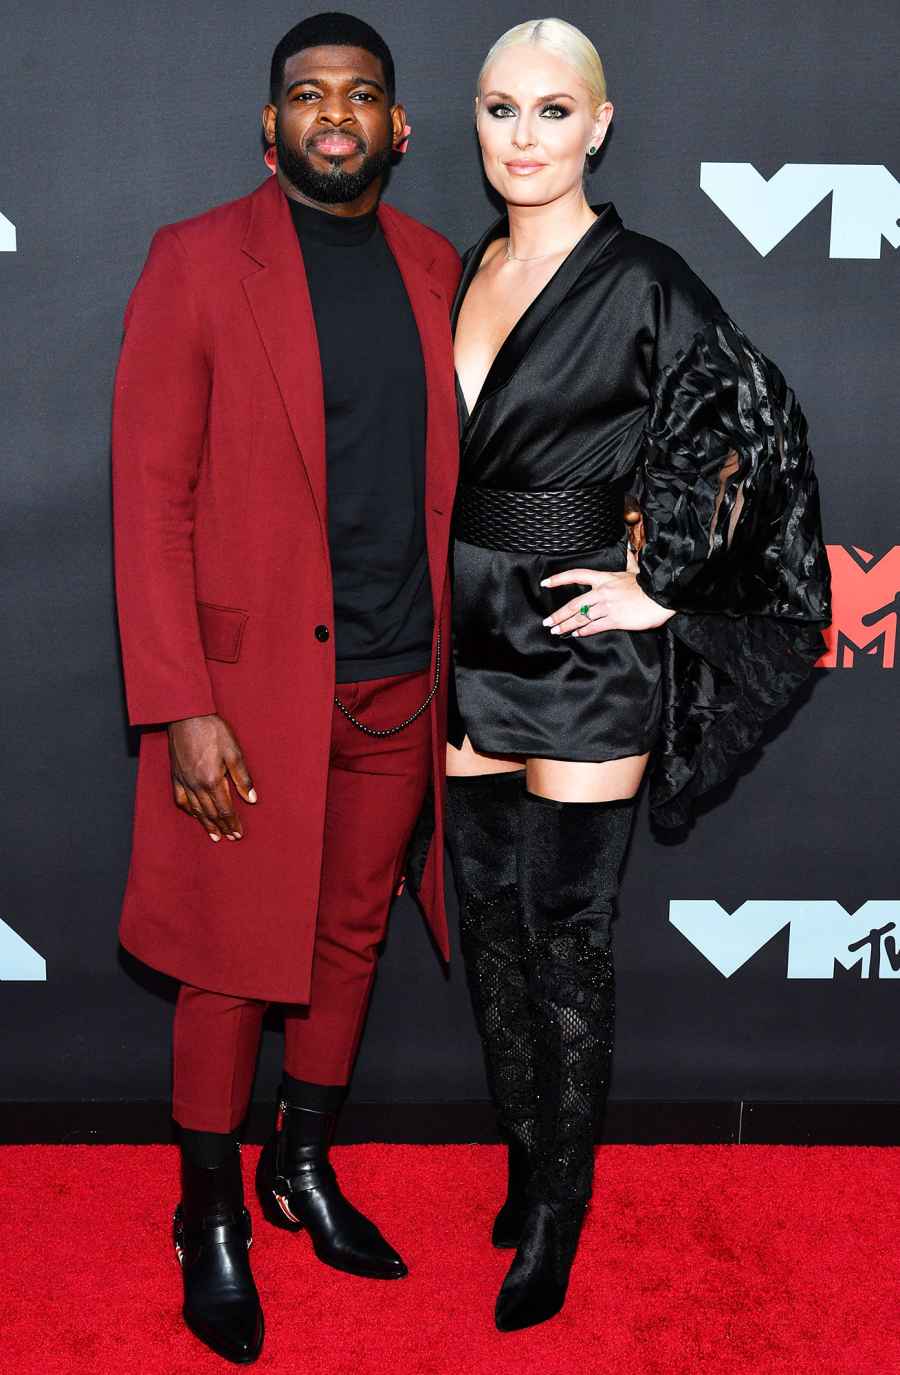 PK Subban and Lindsey Vonn Hottest Couples at the VMAs 2019